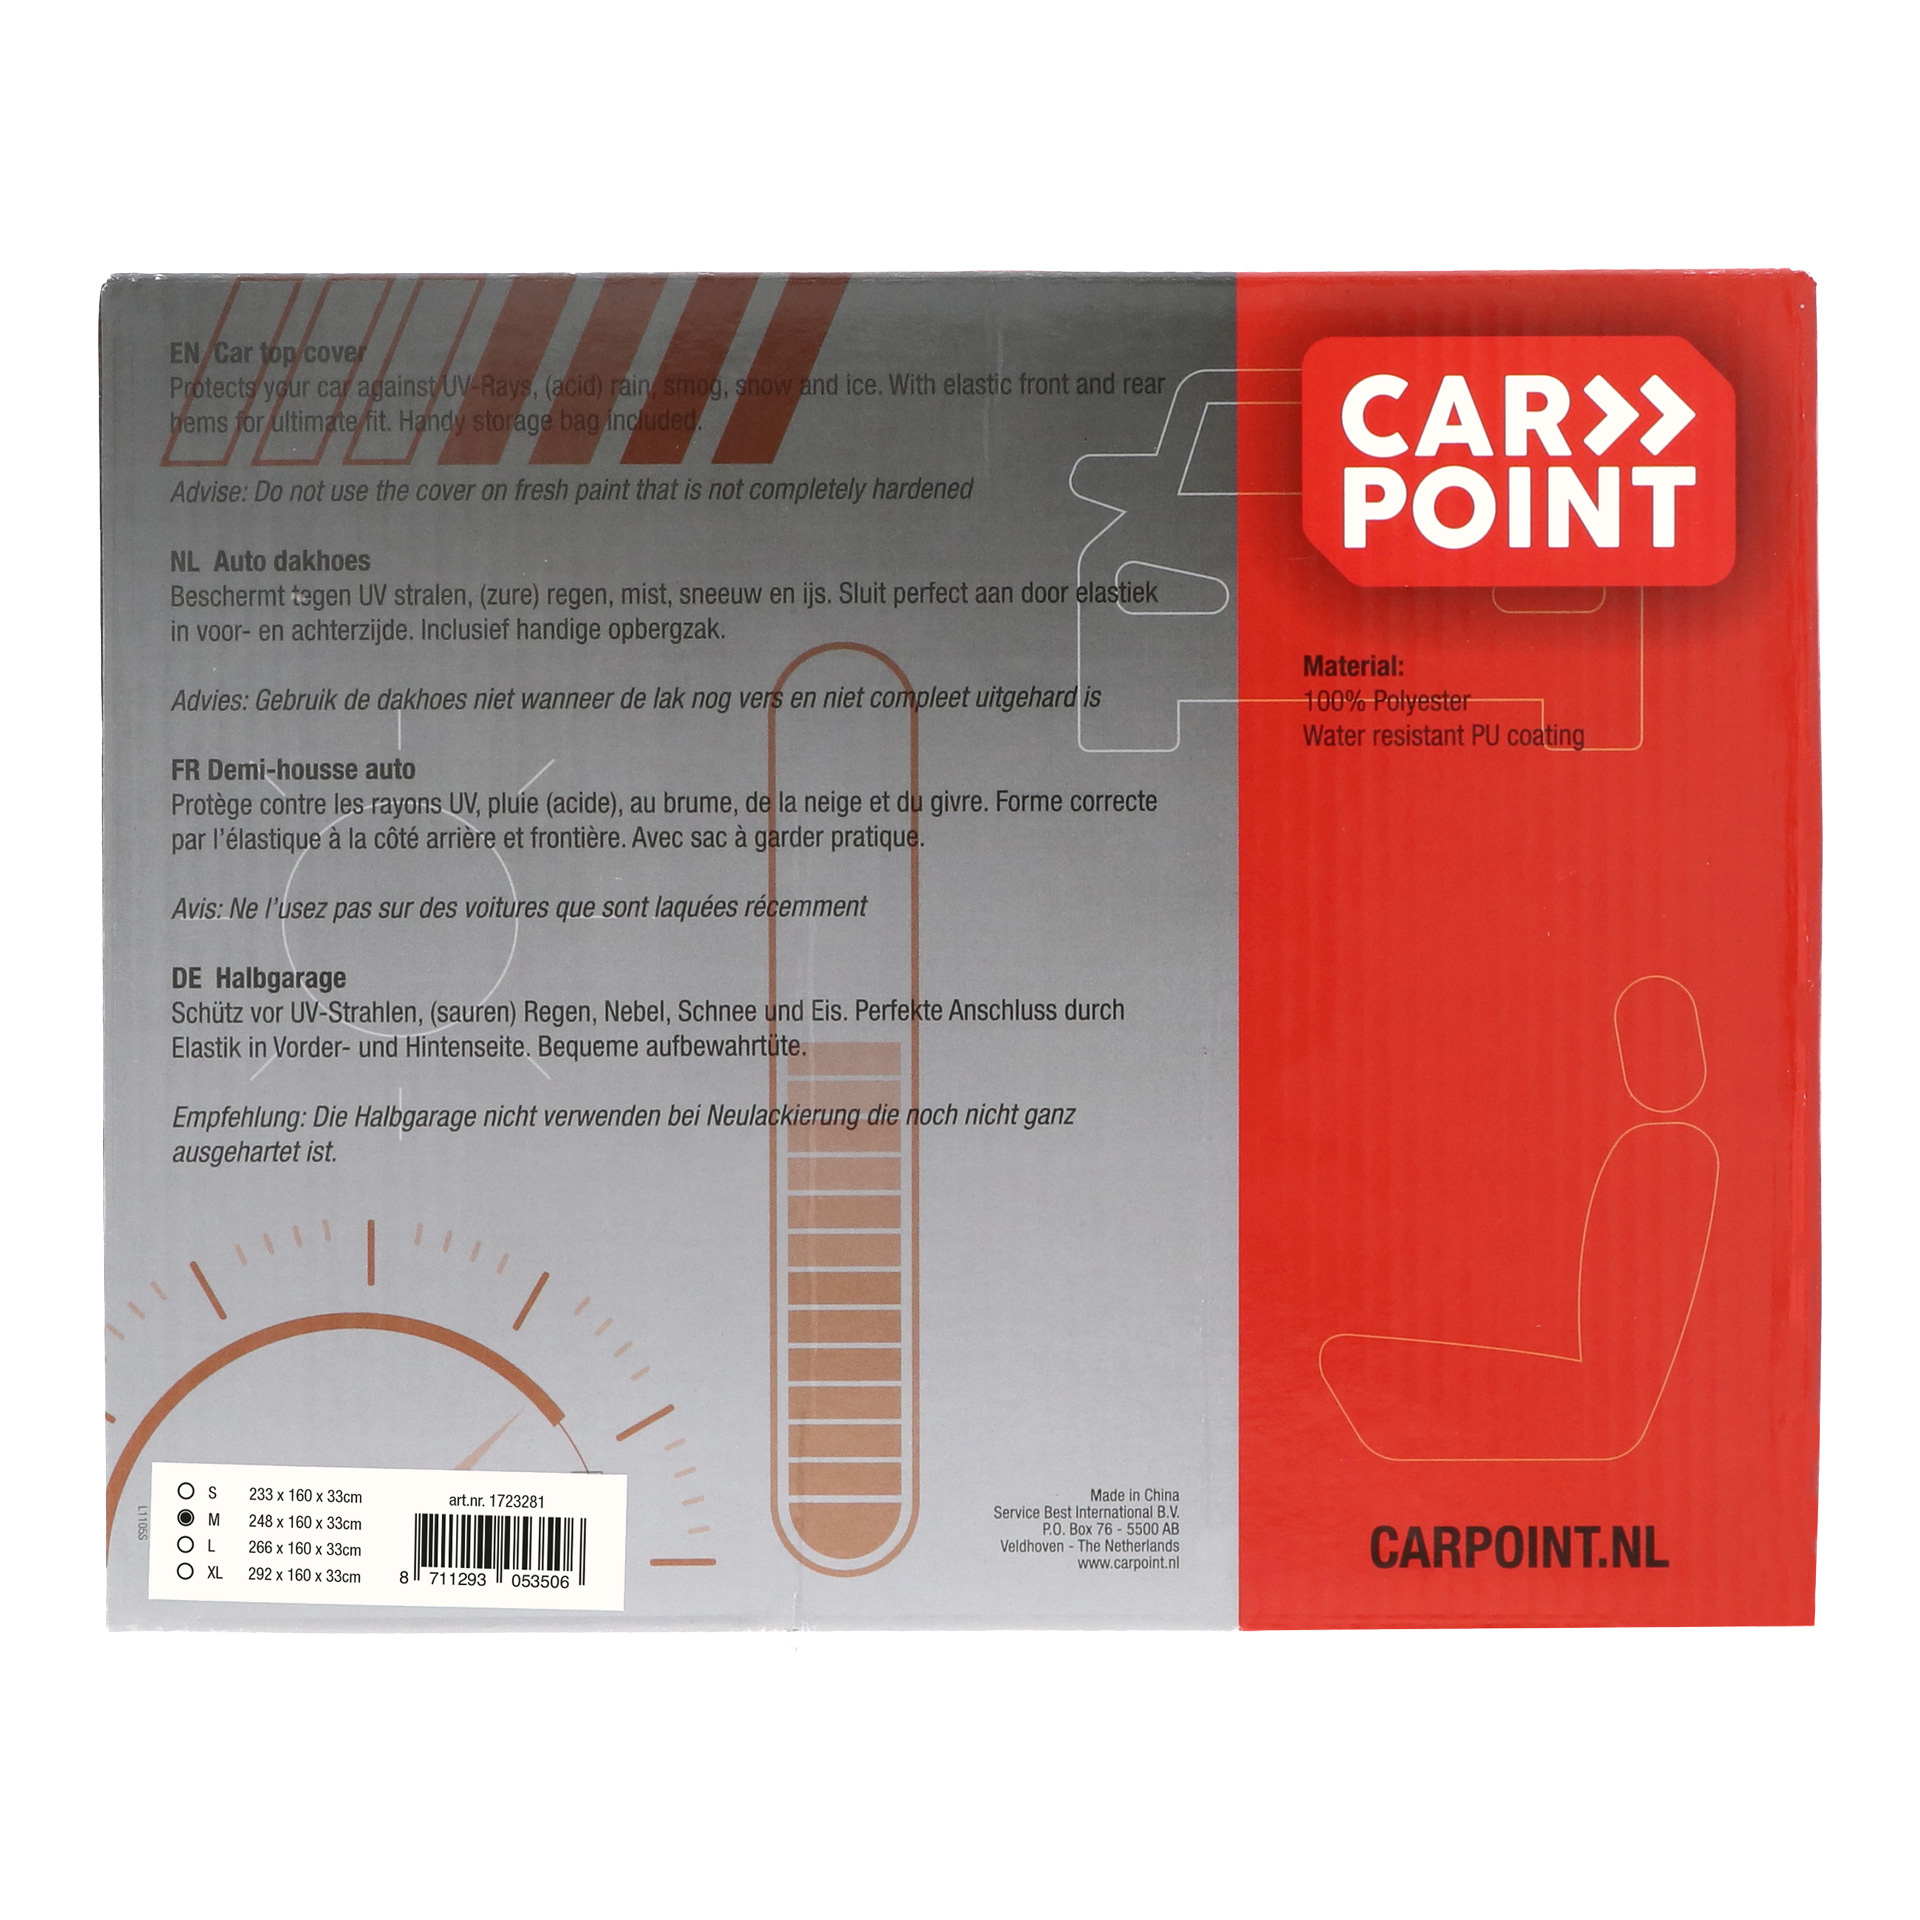 Carpoint Dakhoes Polyester M 248x160x33cm (1723281)